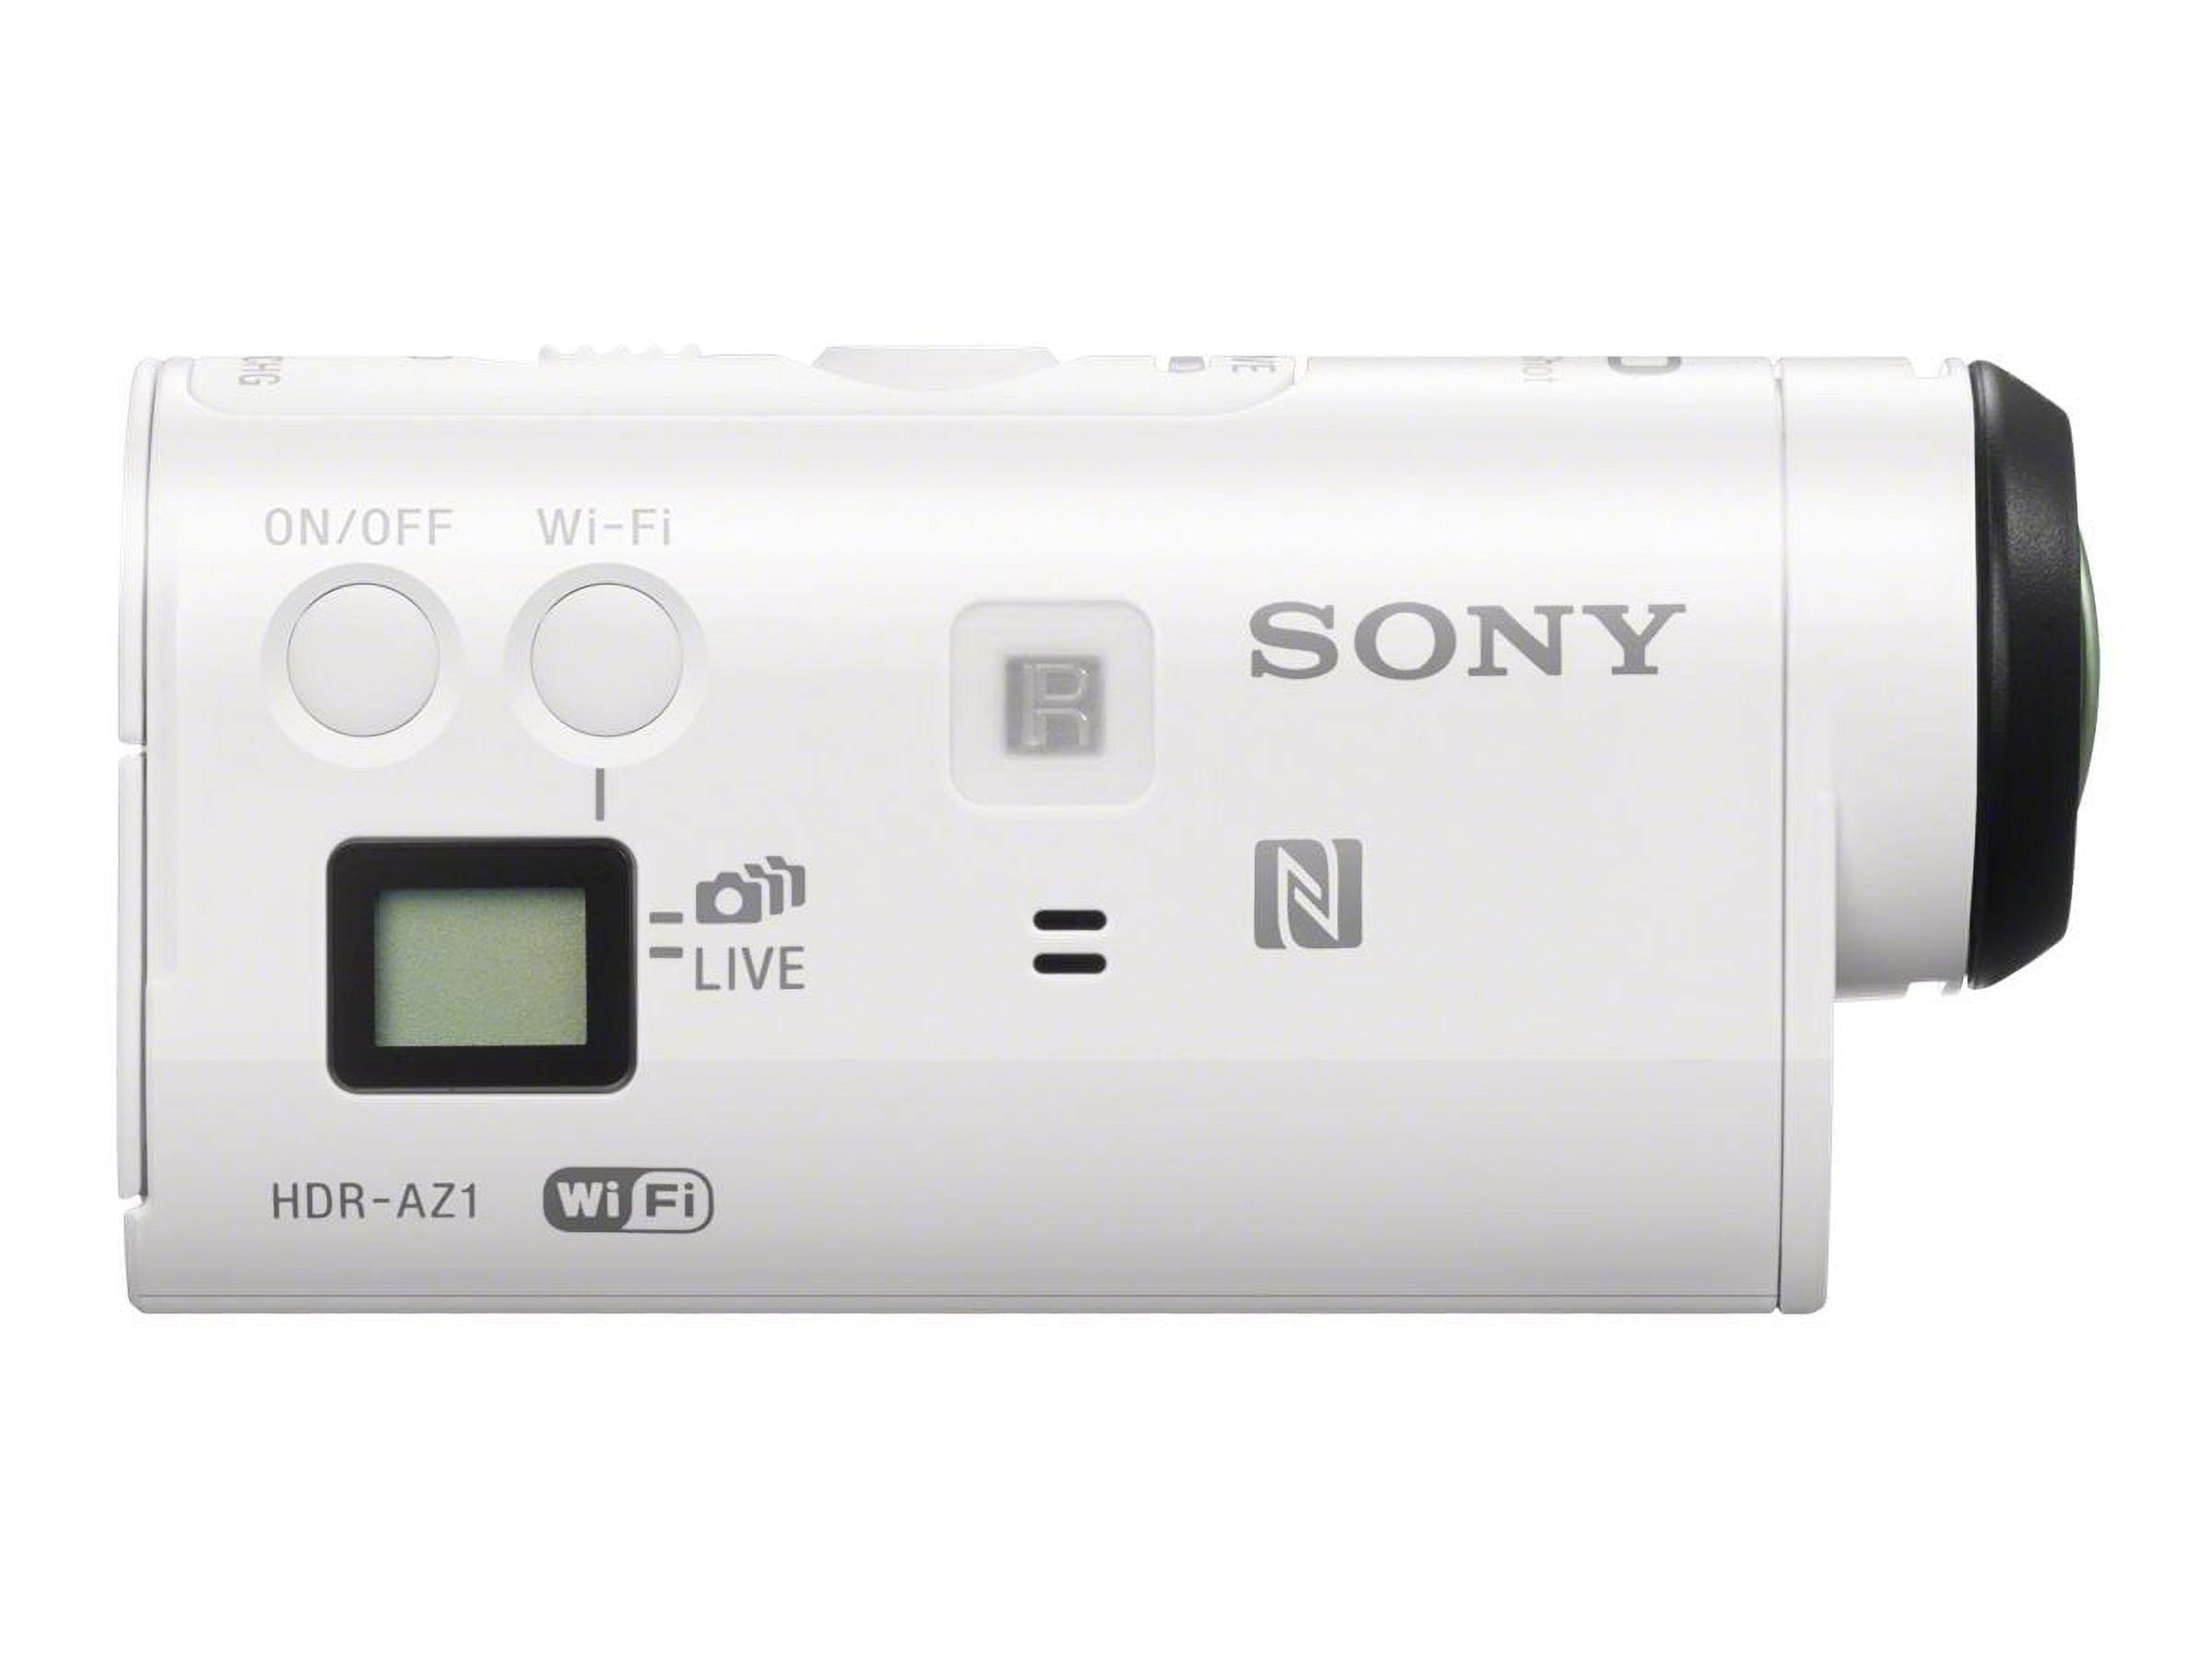 Sony Action Cam Mini HDR-AZ1 - Action camera - 1080p - 16.8 MP - Carl Zeiss  - Wi-Fi, NFC - underwater up to 9.8 ft - white